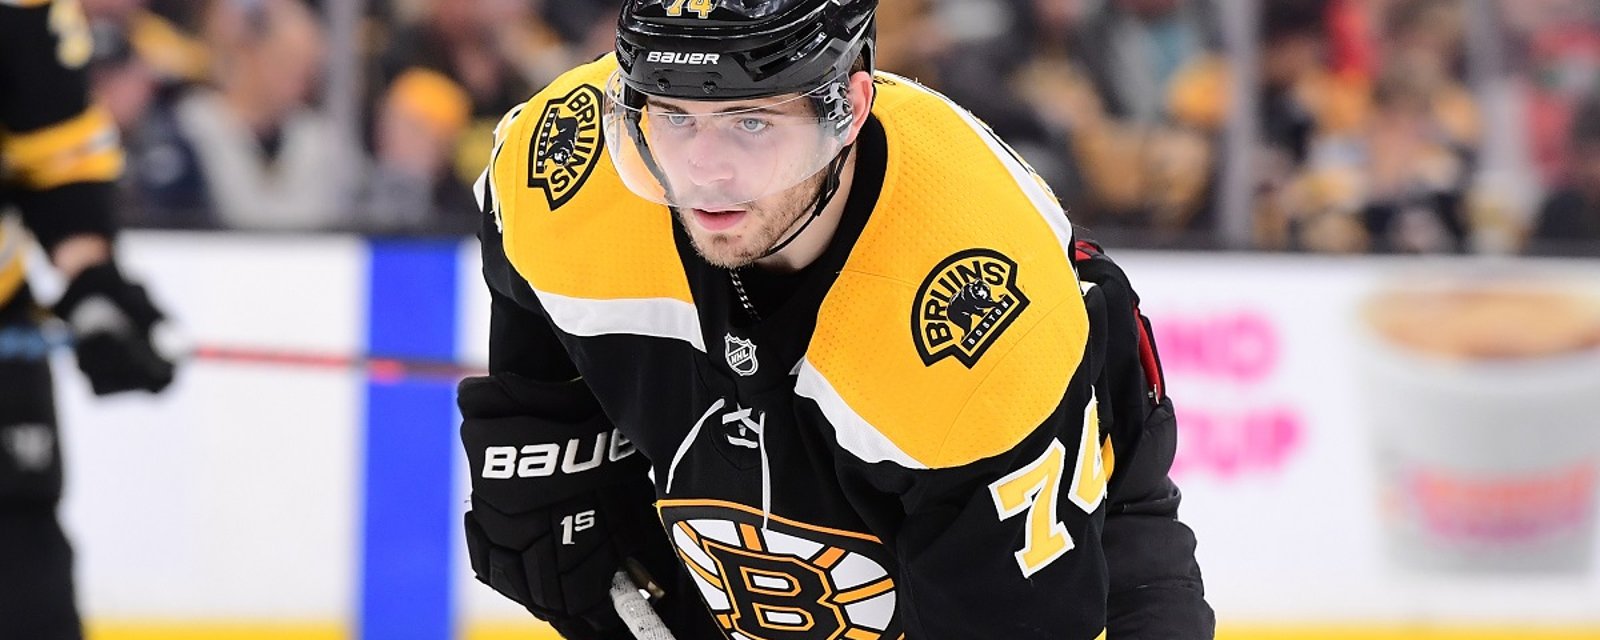 Jake DeBrusk addresses his 'haters', vows to prove them wrong.